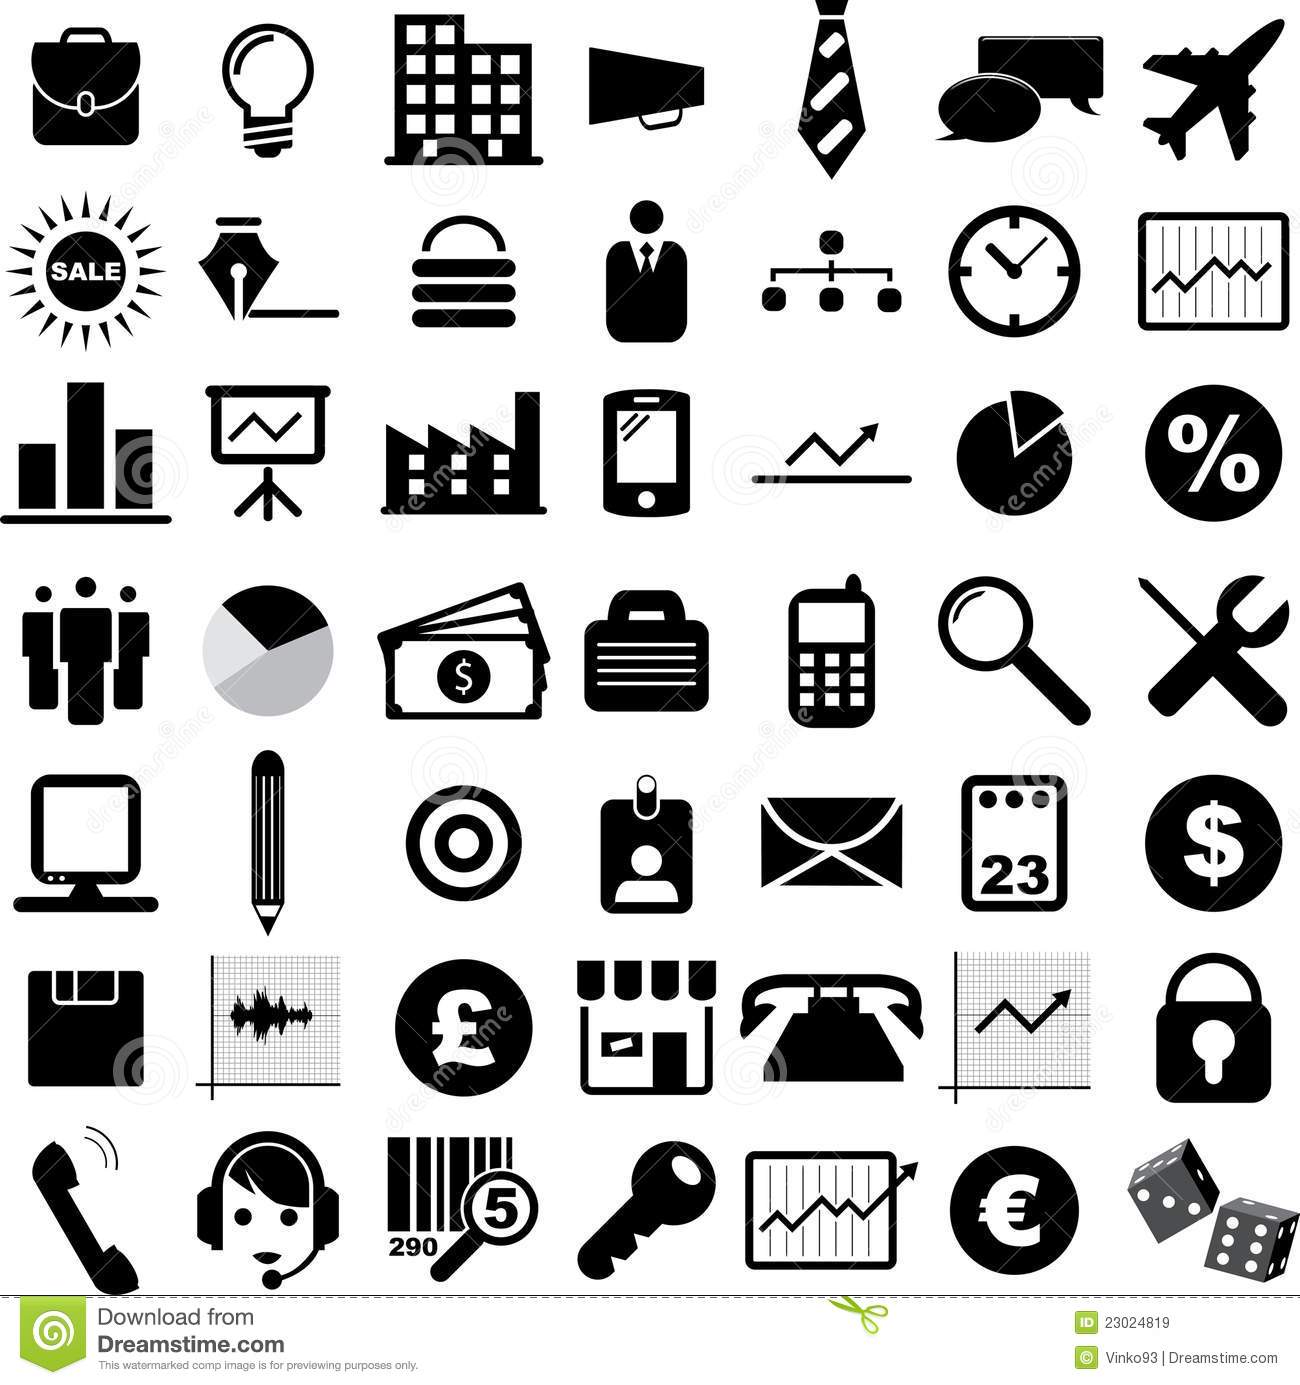 Black and White Business Icons Free